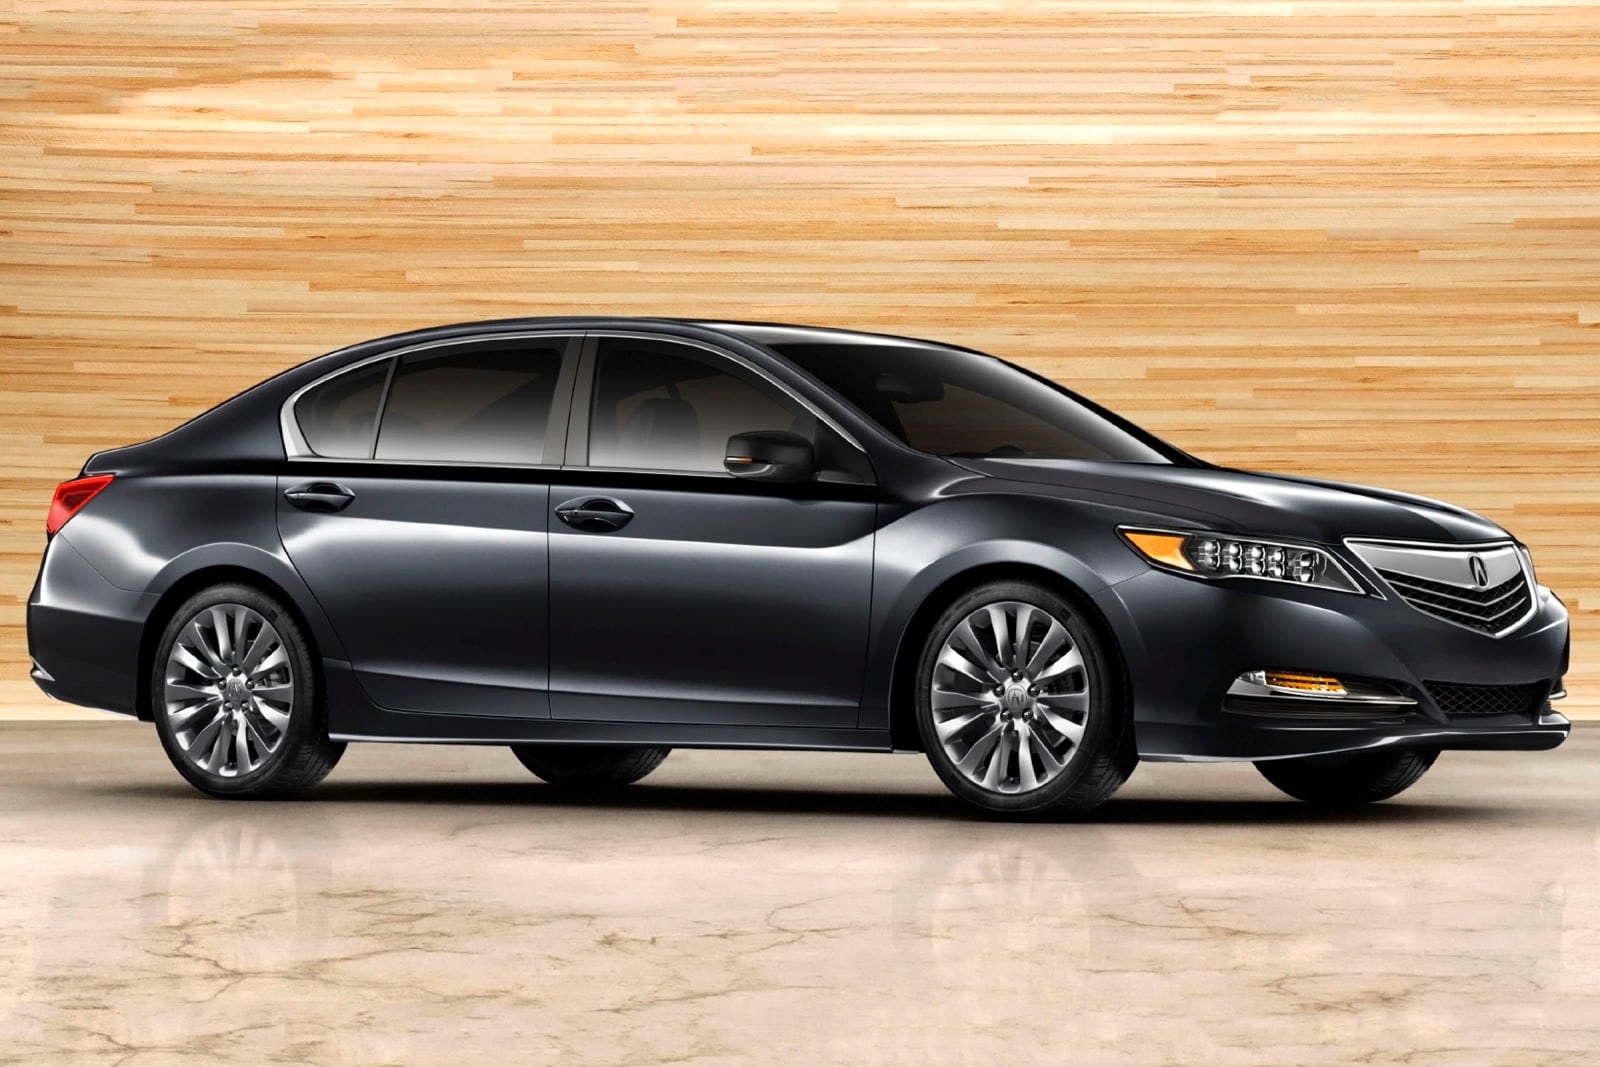 2014 Acura RLX Review & Ratings | Edmunds